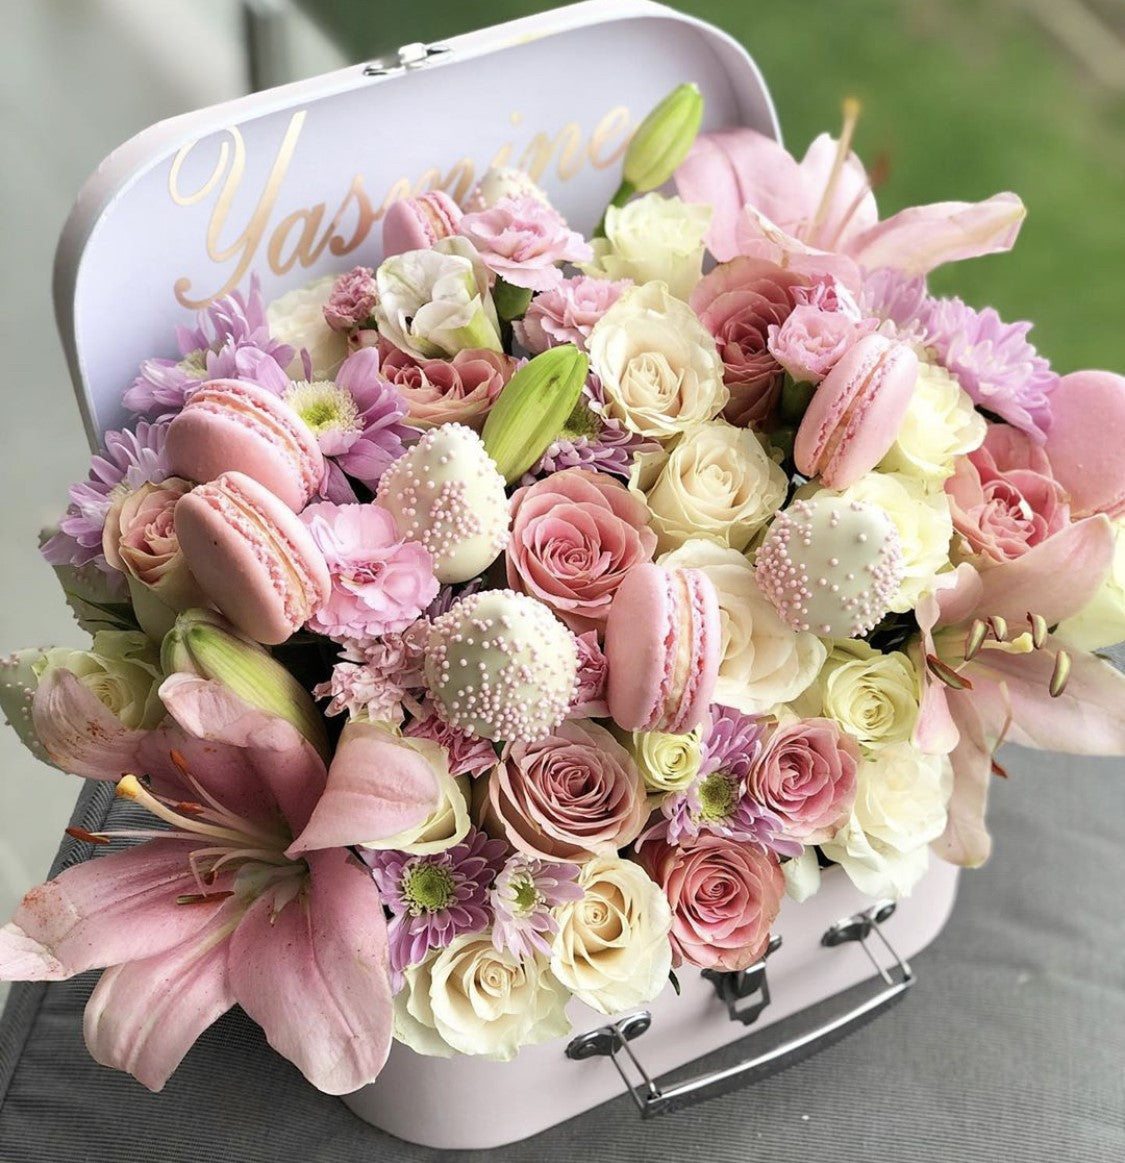 Lollylicious Edible Gifts - Looking for the perfect gift? Our Chocolate  bouquets are sure to impress! FERREROLICIOUS - The cutest bunch of  Ferreros. Arranged in a Posy Style Bouquet wrapped with gorgeous